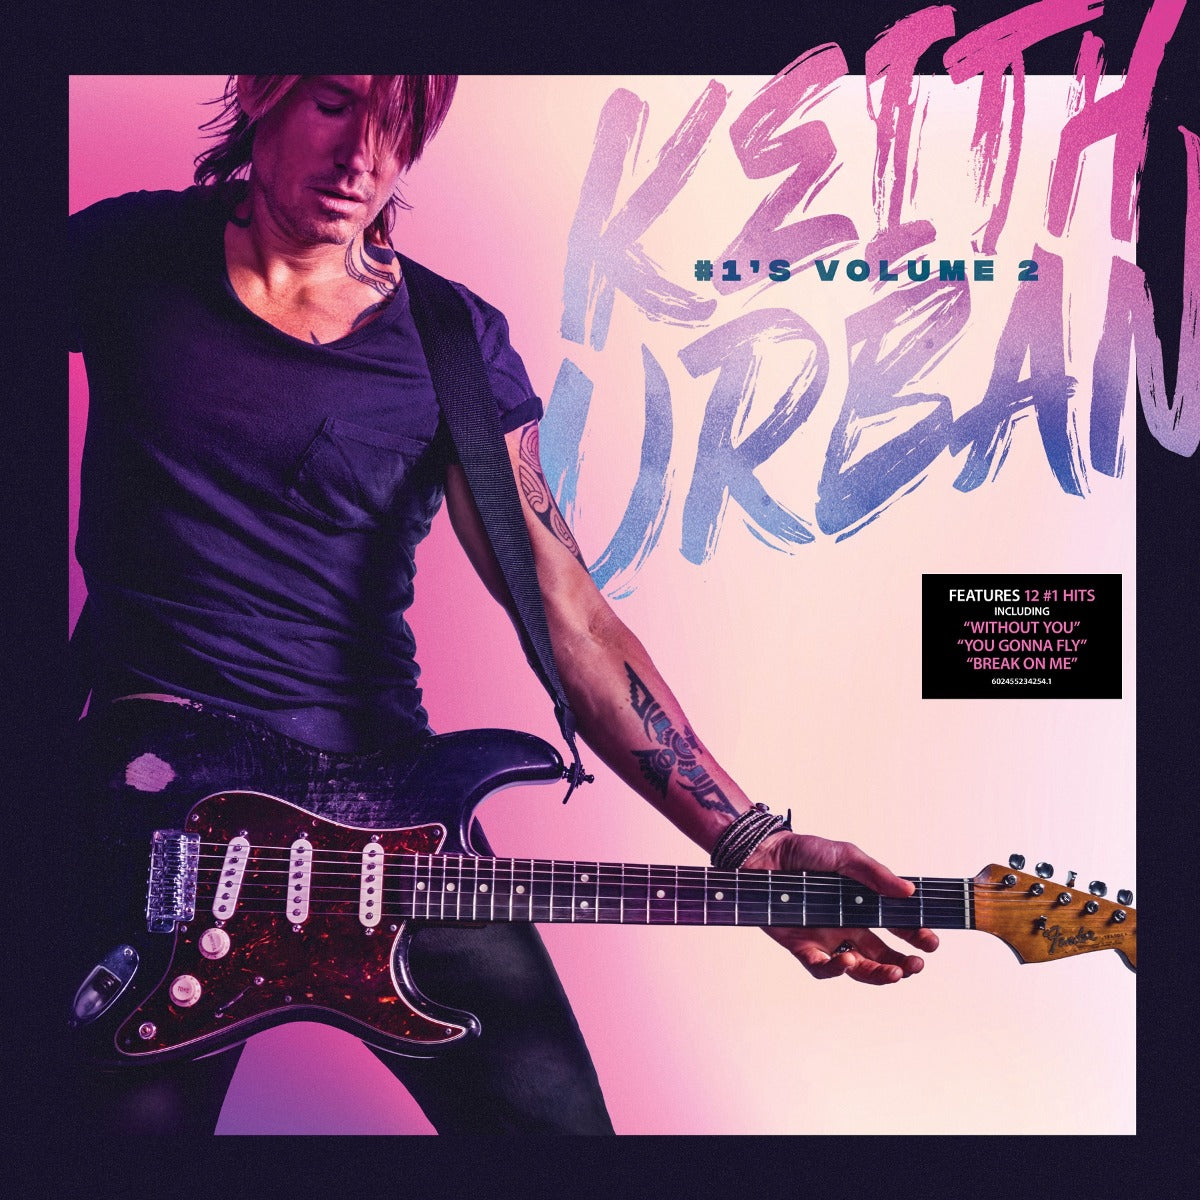 Keith Urban | Keith Urban - #1's Volume 2 (Limited Edition, Grape Colored Vinyl, Poster) | Vinyl - 0